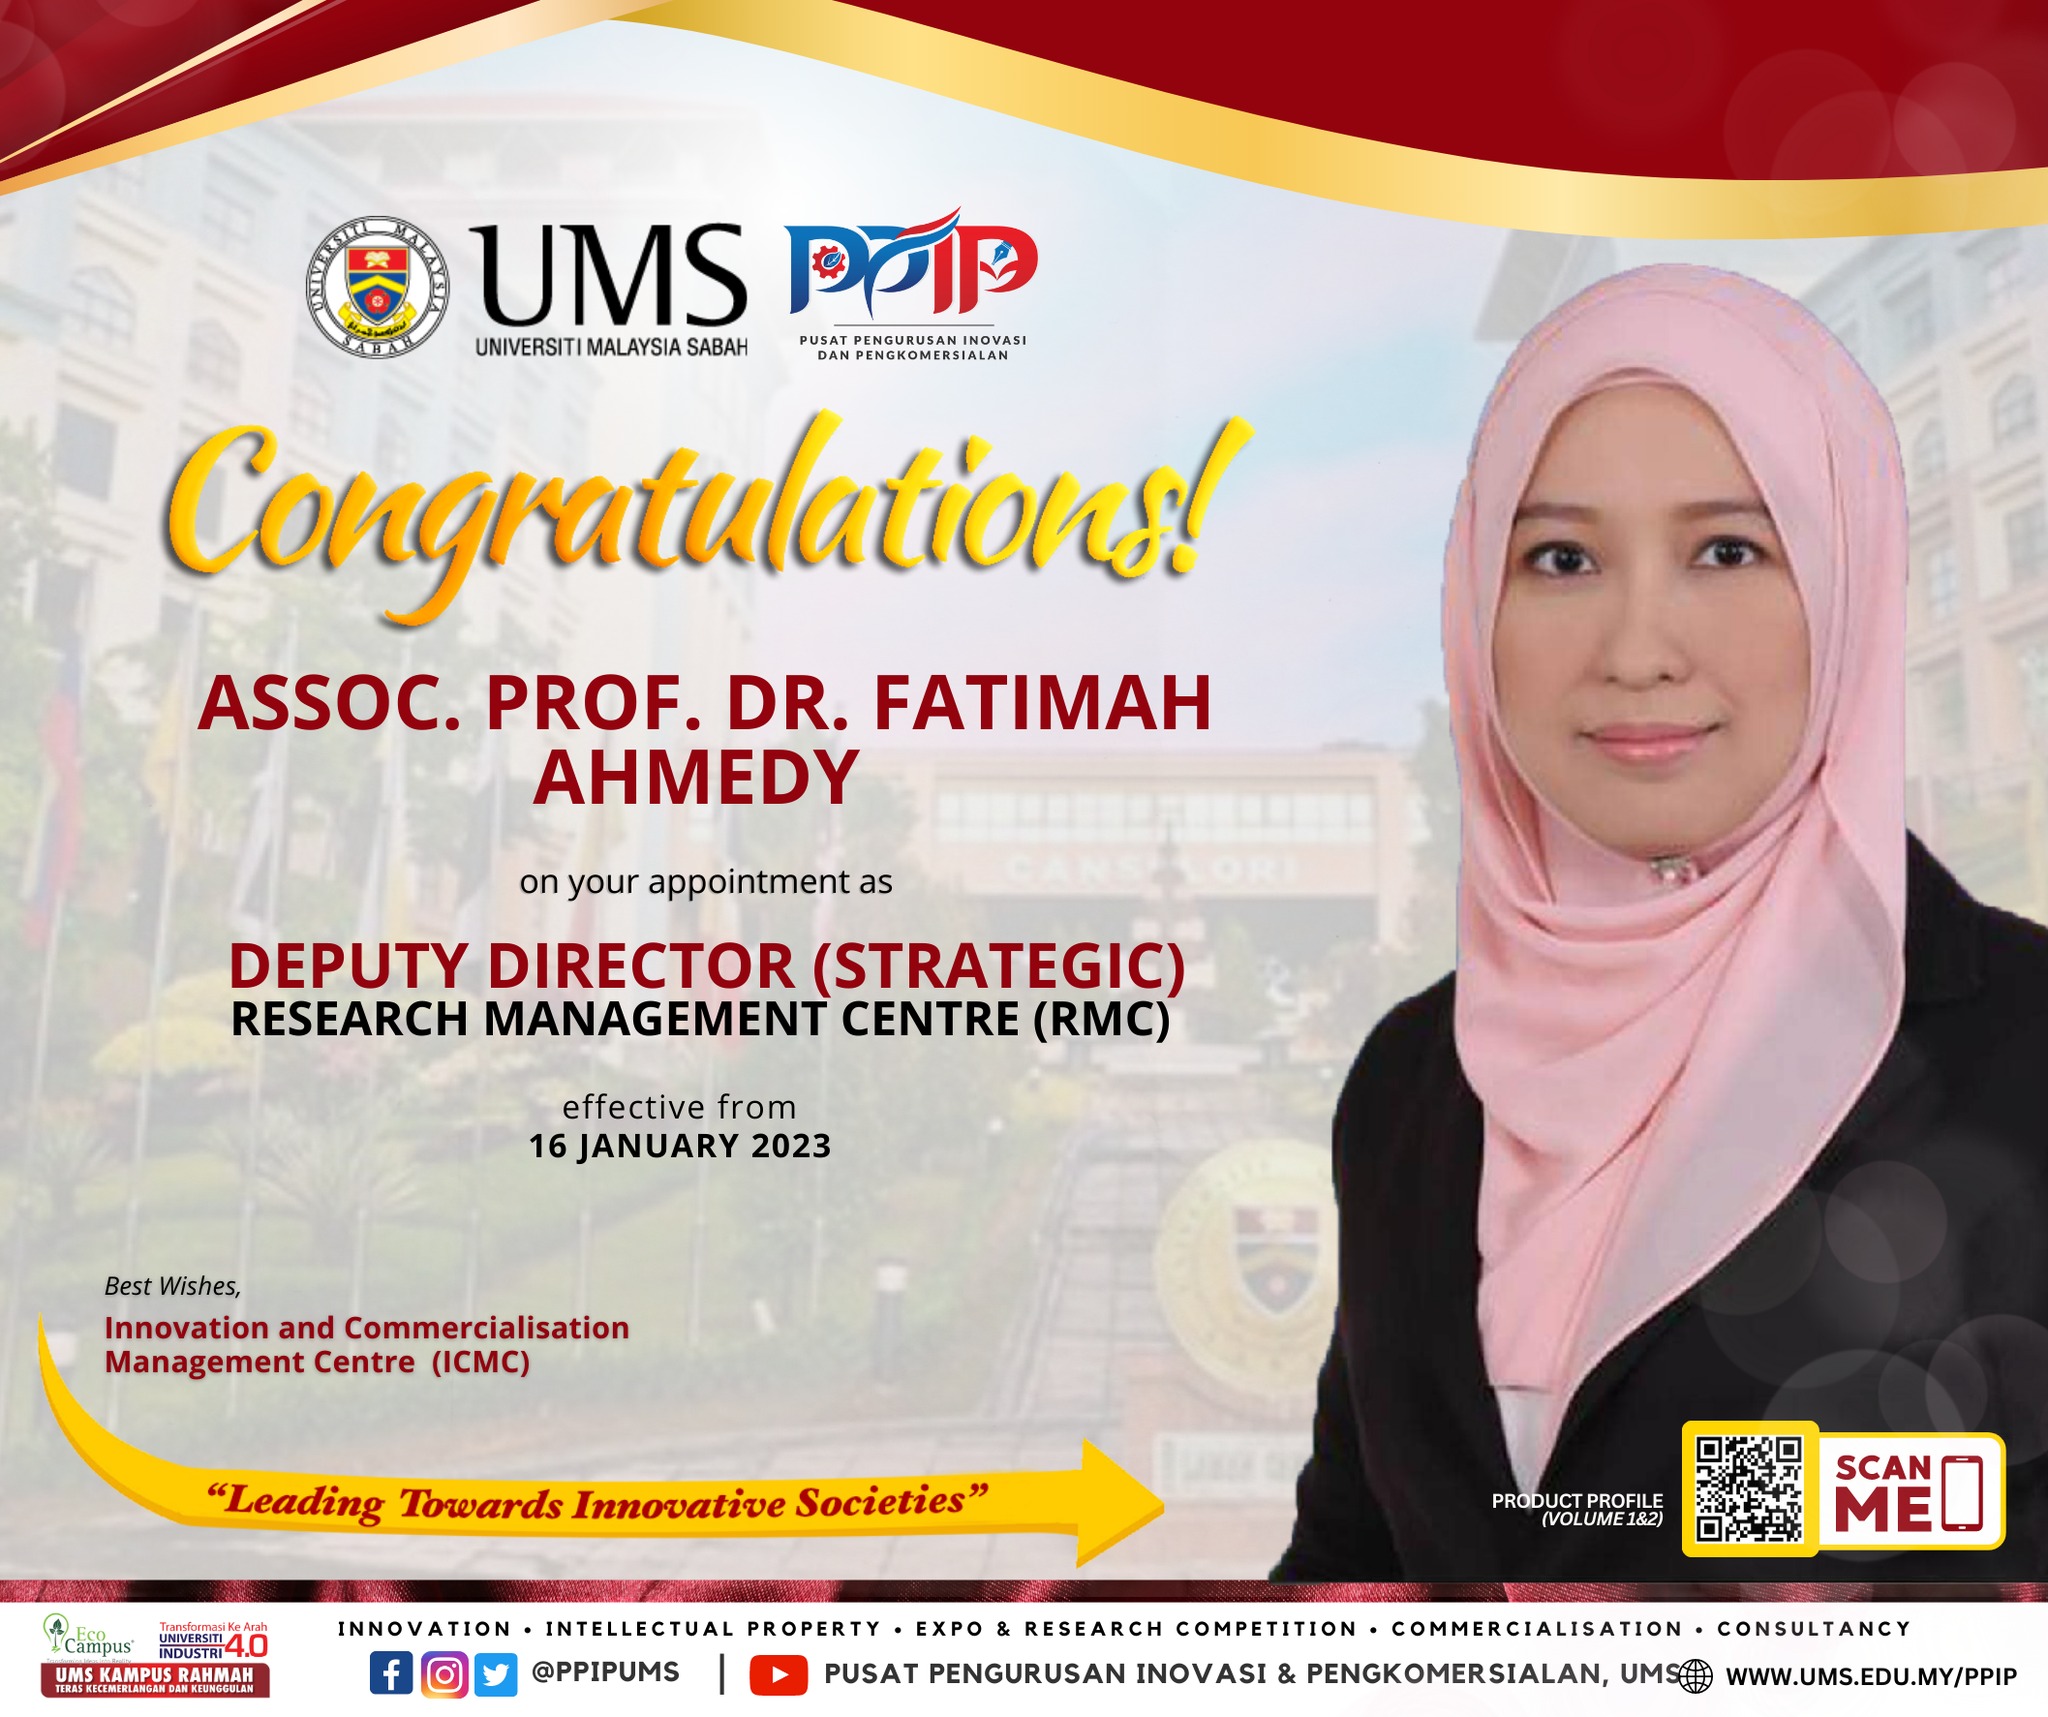 Congratulations to Assoc. Prof. Dr. Fatimah Ahmedy on your appointment as the Deputy Director (Strategic) of RMC, UMS